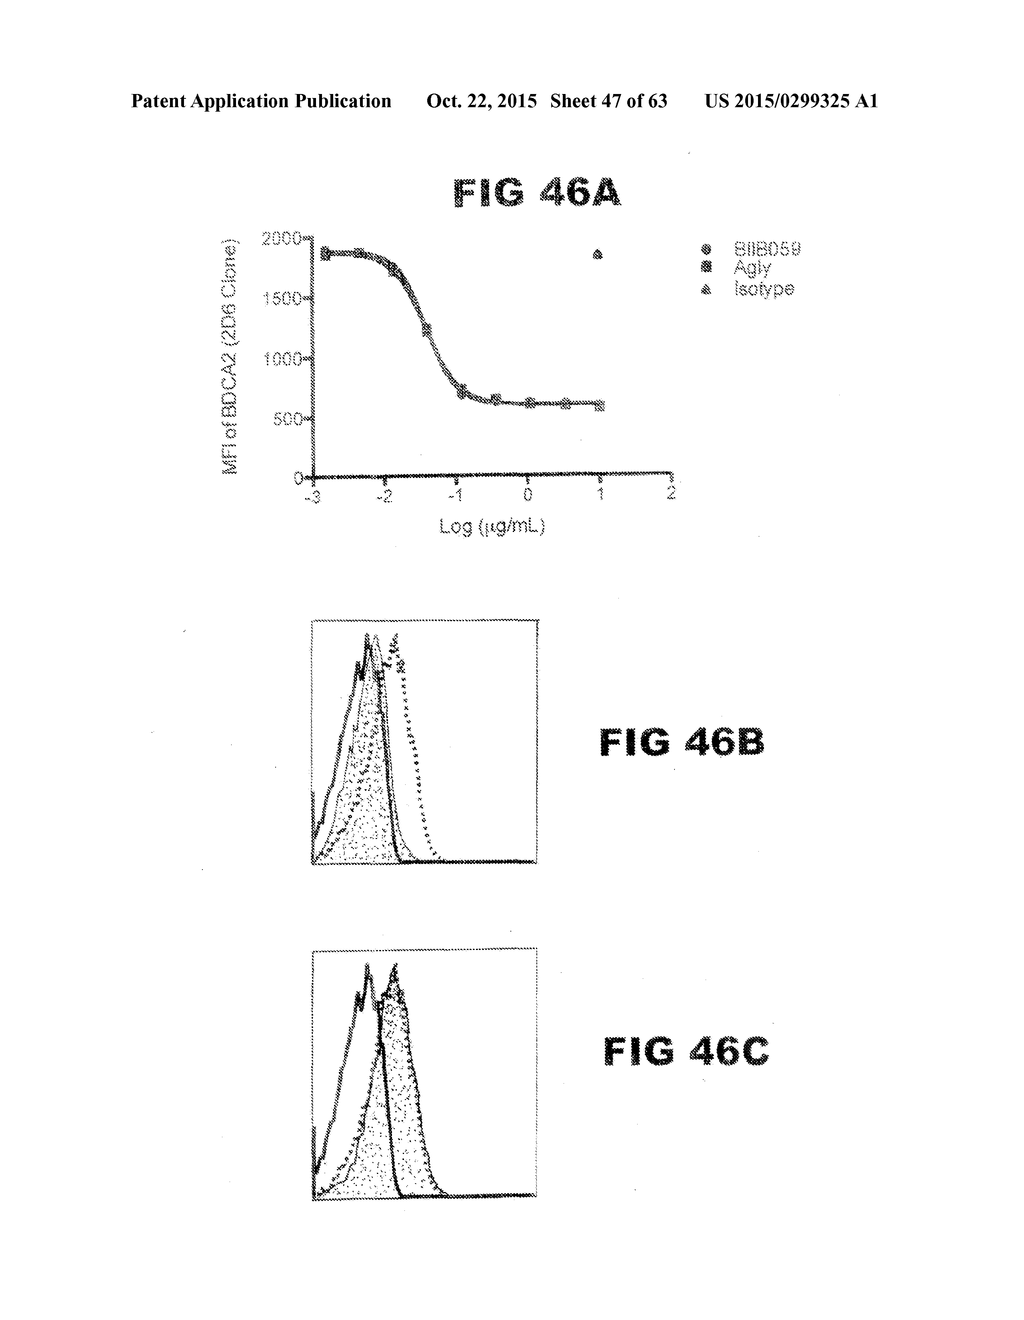 Anti-Blood Dendritic Cell Antigen 2 Antibodies And Uses Thereof - diagram, schematic, and image 48